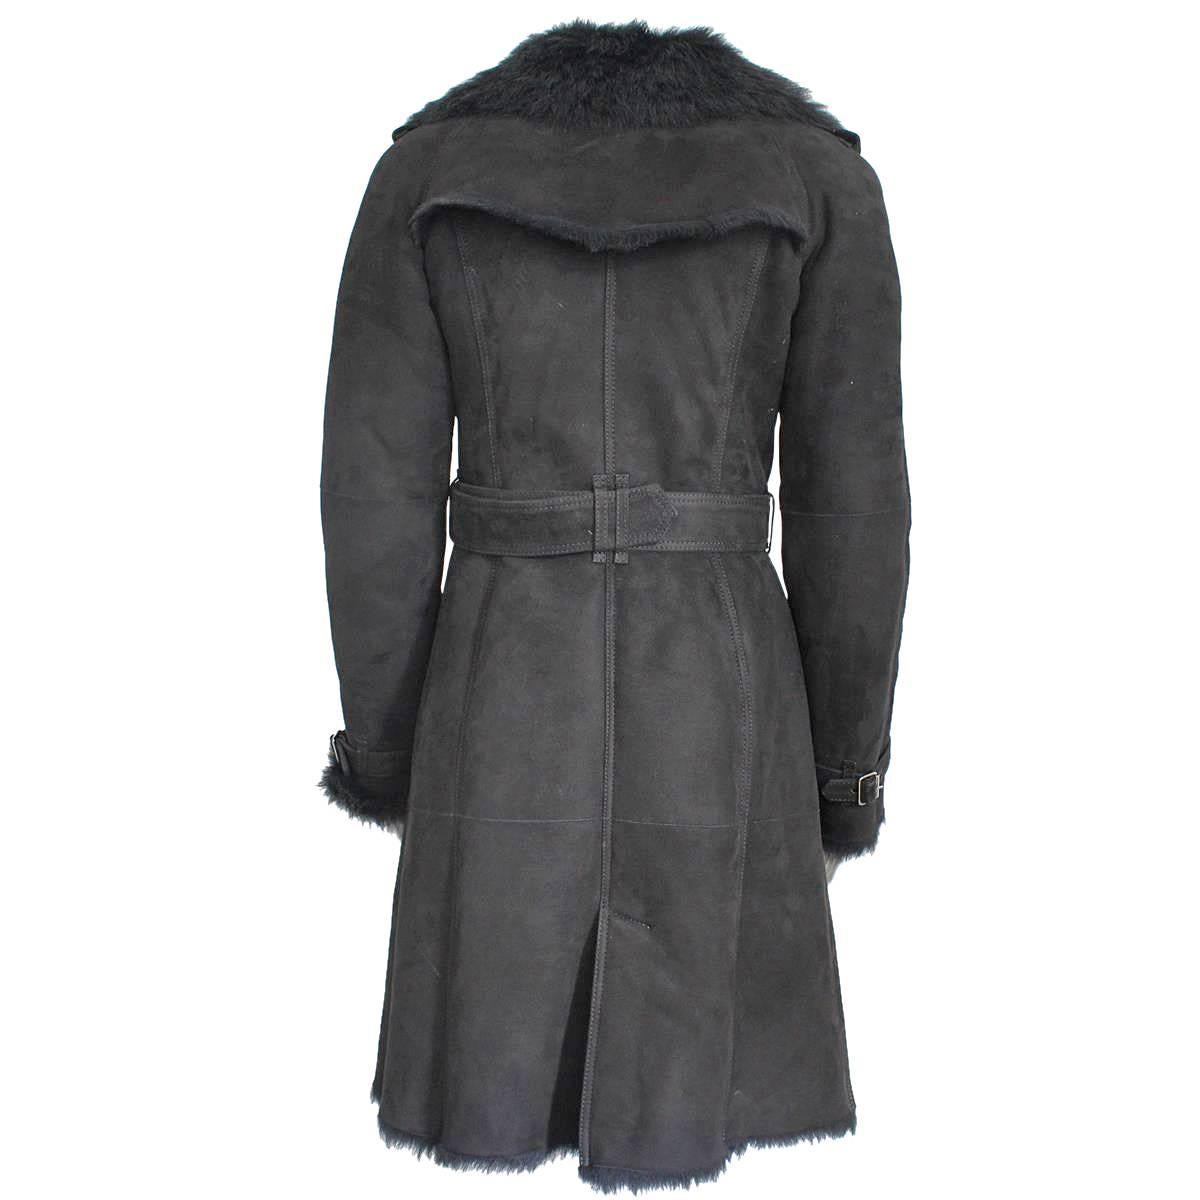 Wonderful and super warm shearling coat by Burberry
Bought in St Moritz, Switzerland
100% Shearling lamb
Internal lamb fur
Black color
Double breasted
Two pockets
With belt
Total length cm 90 (35.4 inches)
Size italian 40, 40/42 real